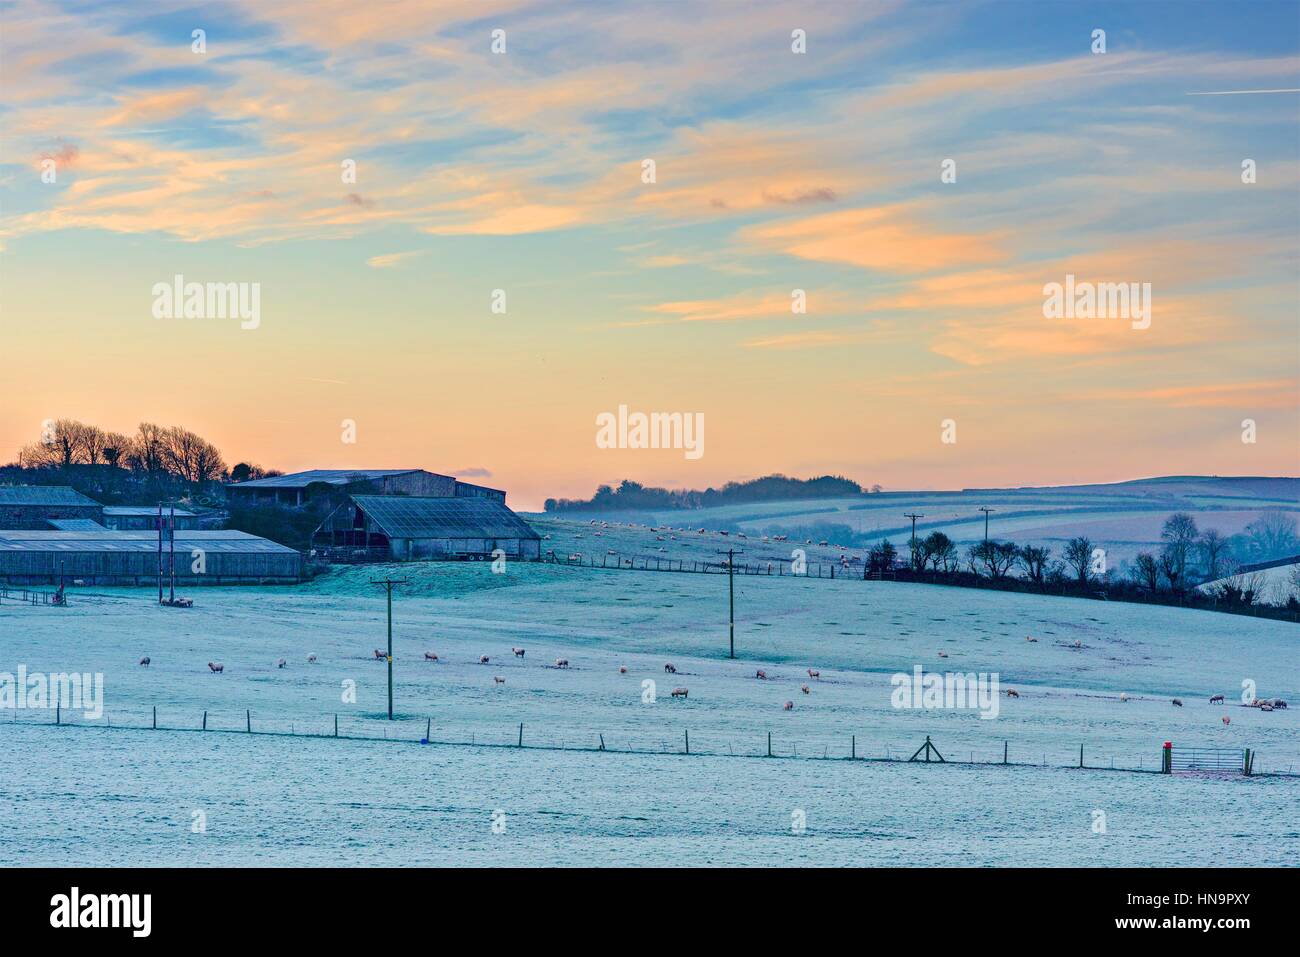 A rural landscape showing frost and an early sunrise. The horizon is warming up pink and yellow with farm buildings and sheep grazing in the fields. Stock Photo